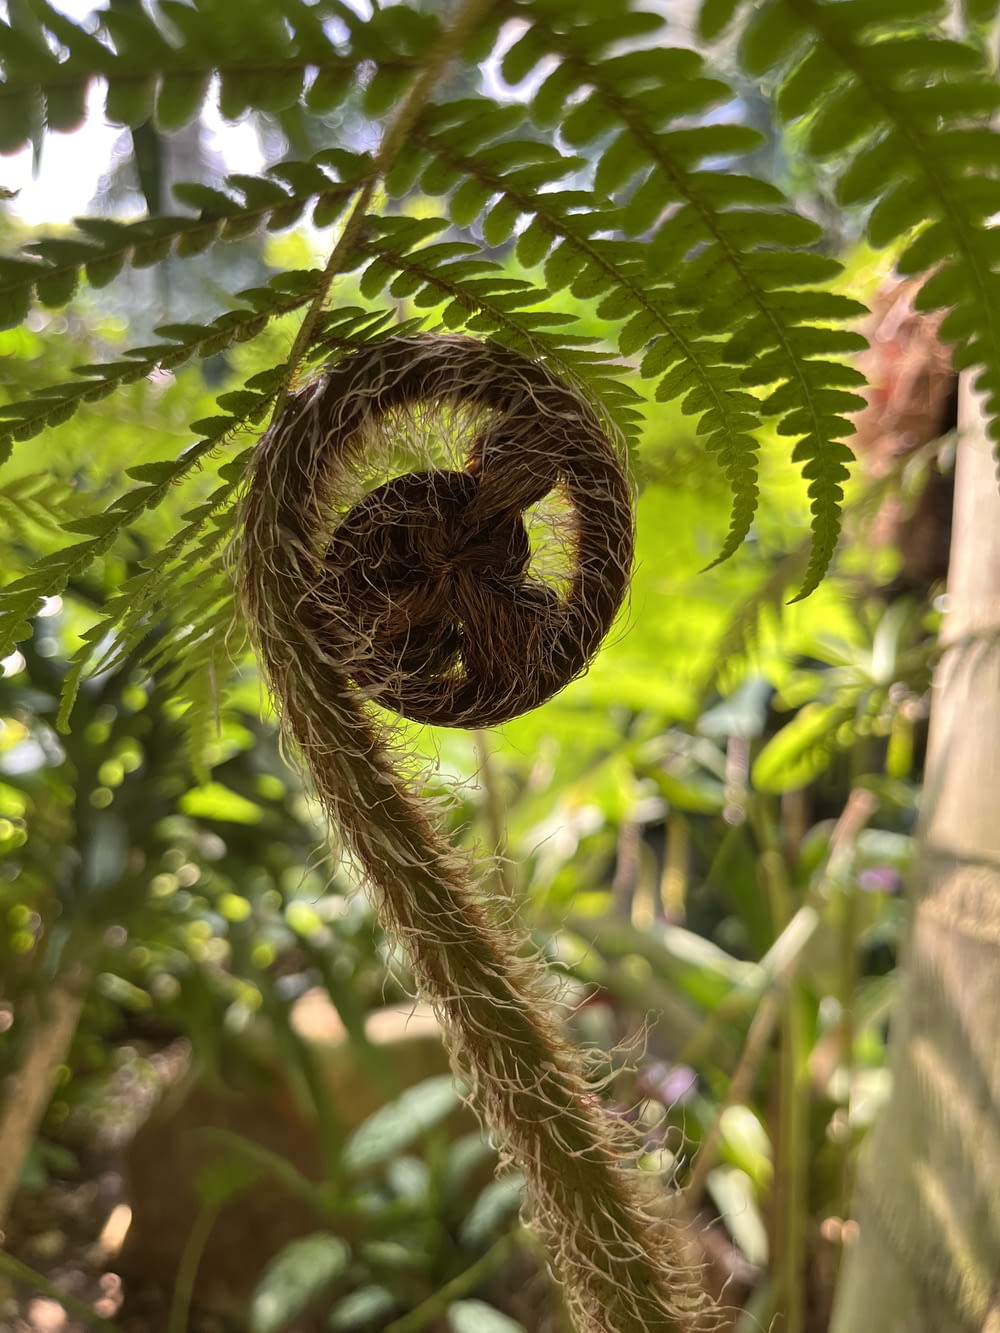 a bird nest hanging from a tree branch